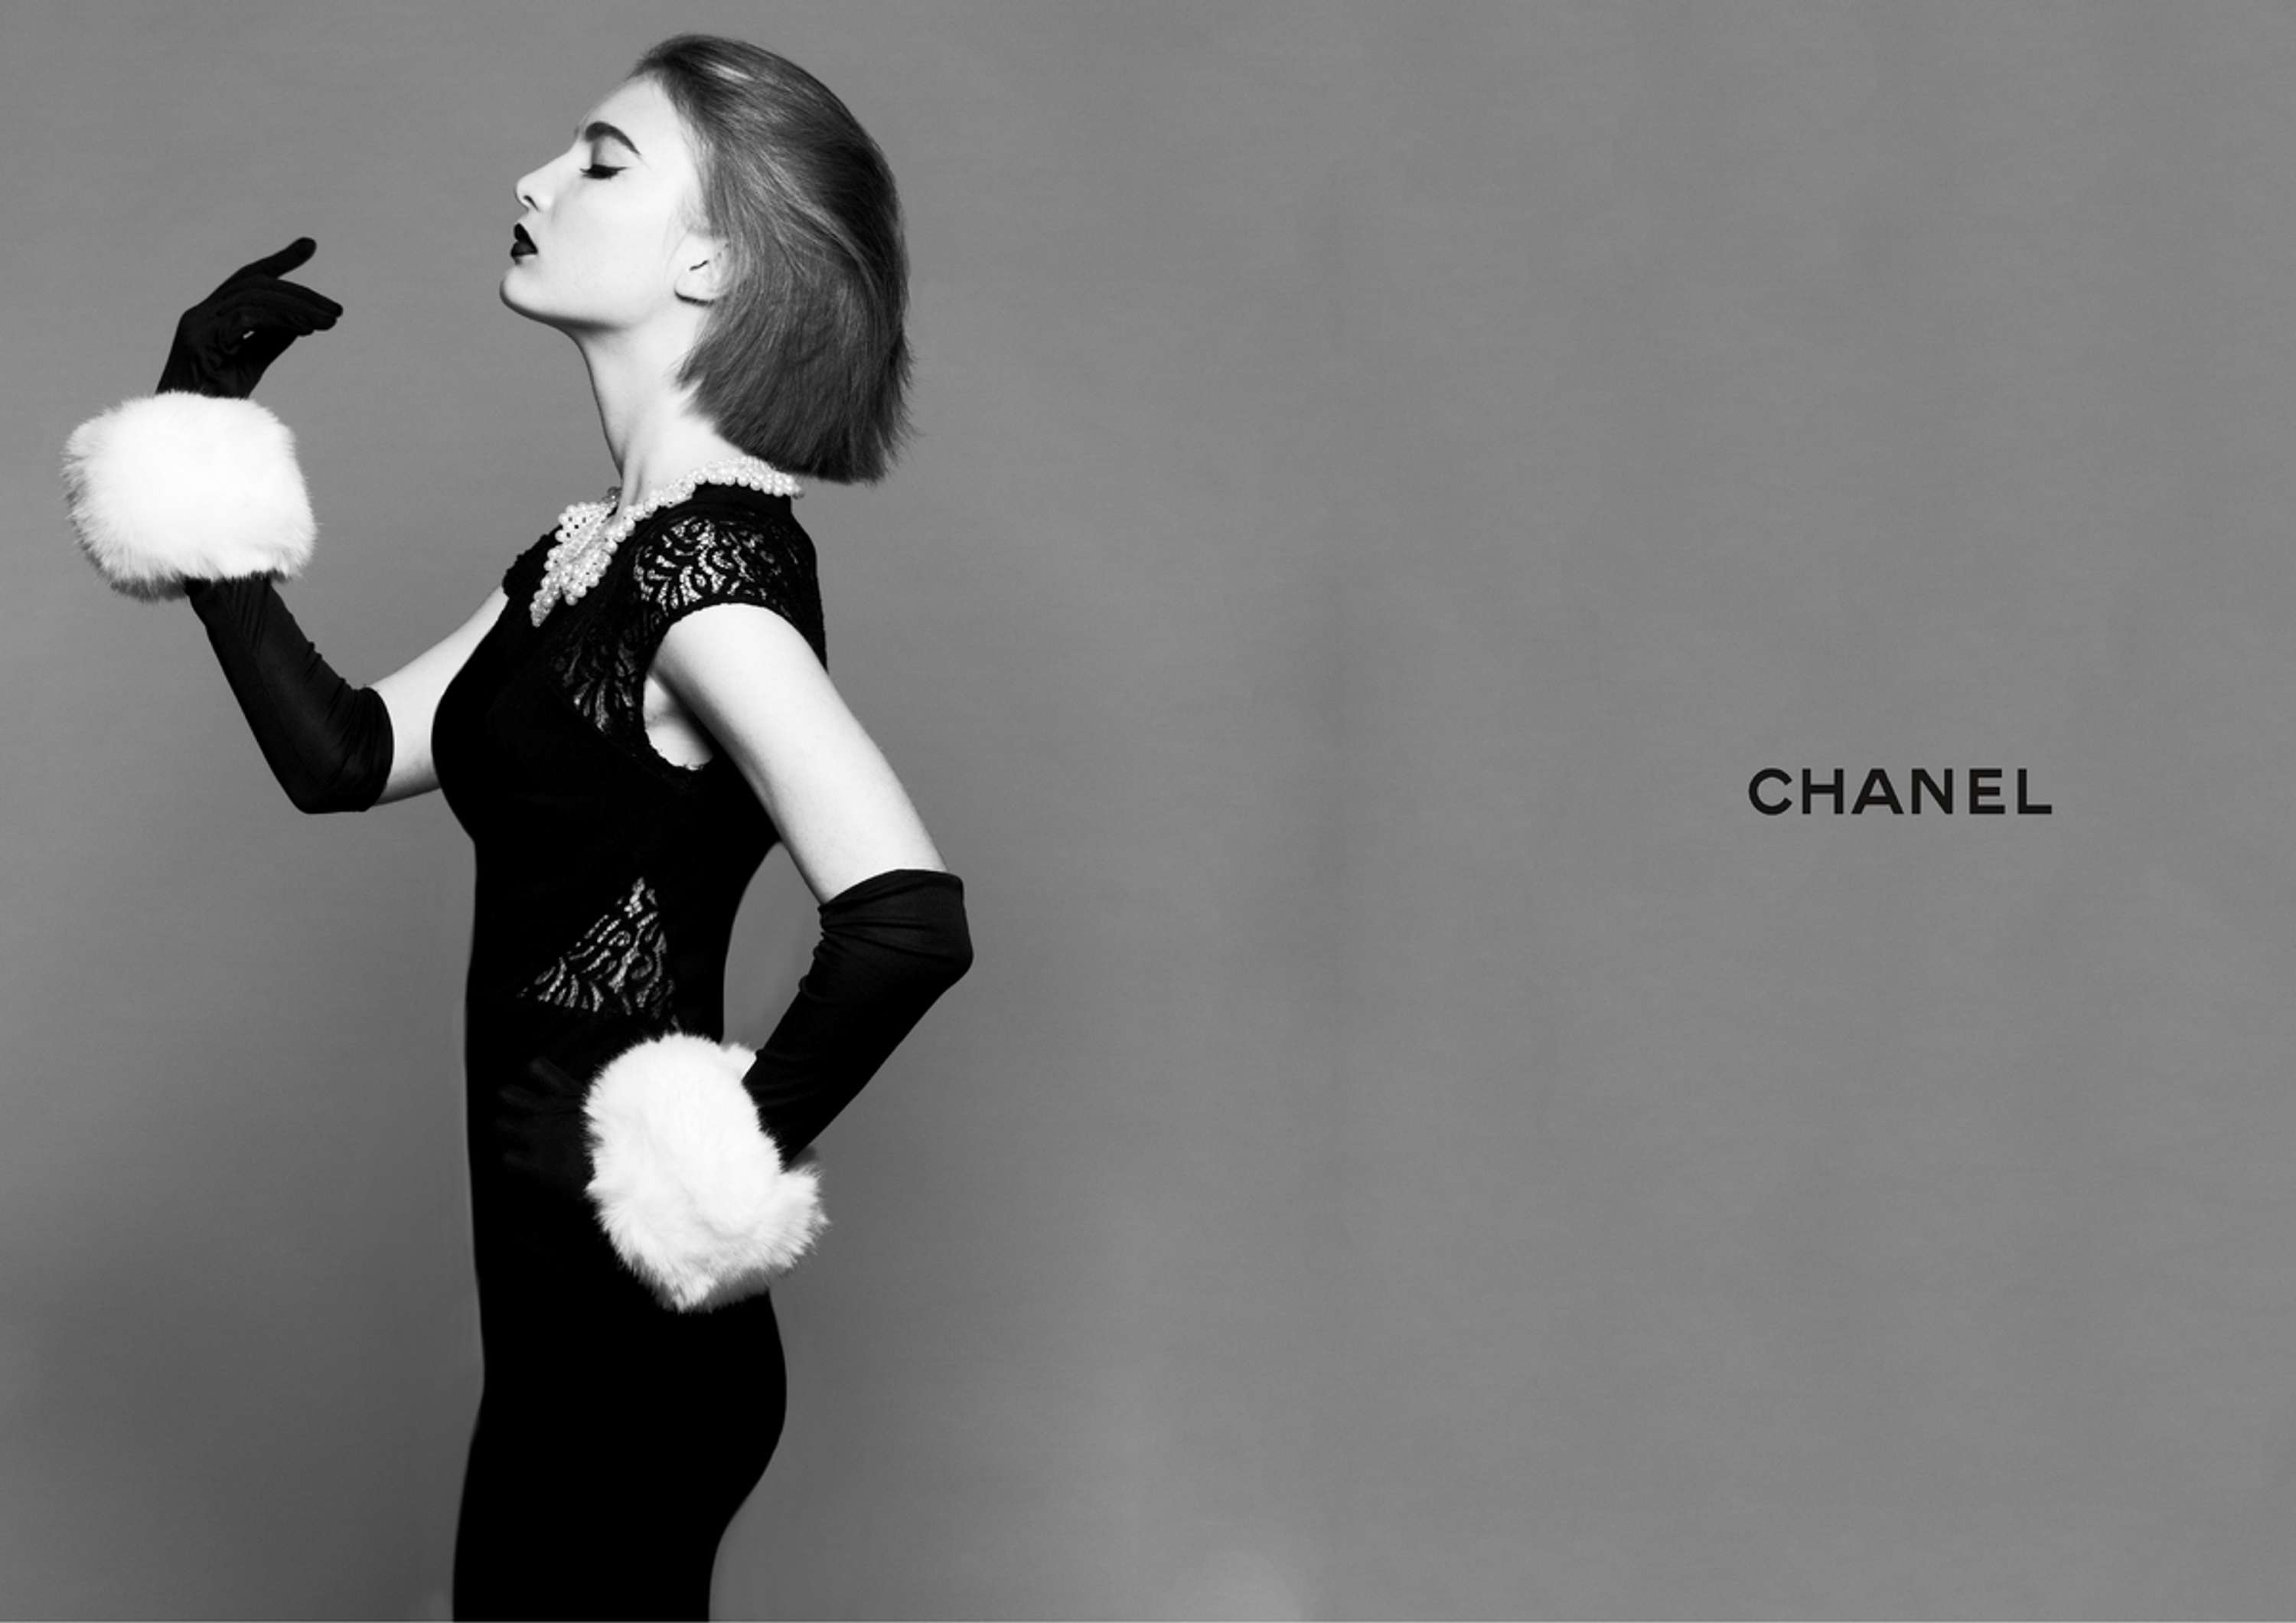 Chanel Advertising Concepts | The Dots